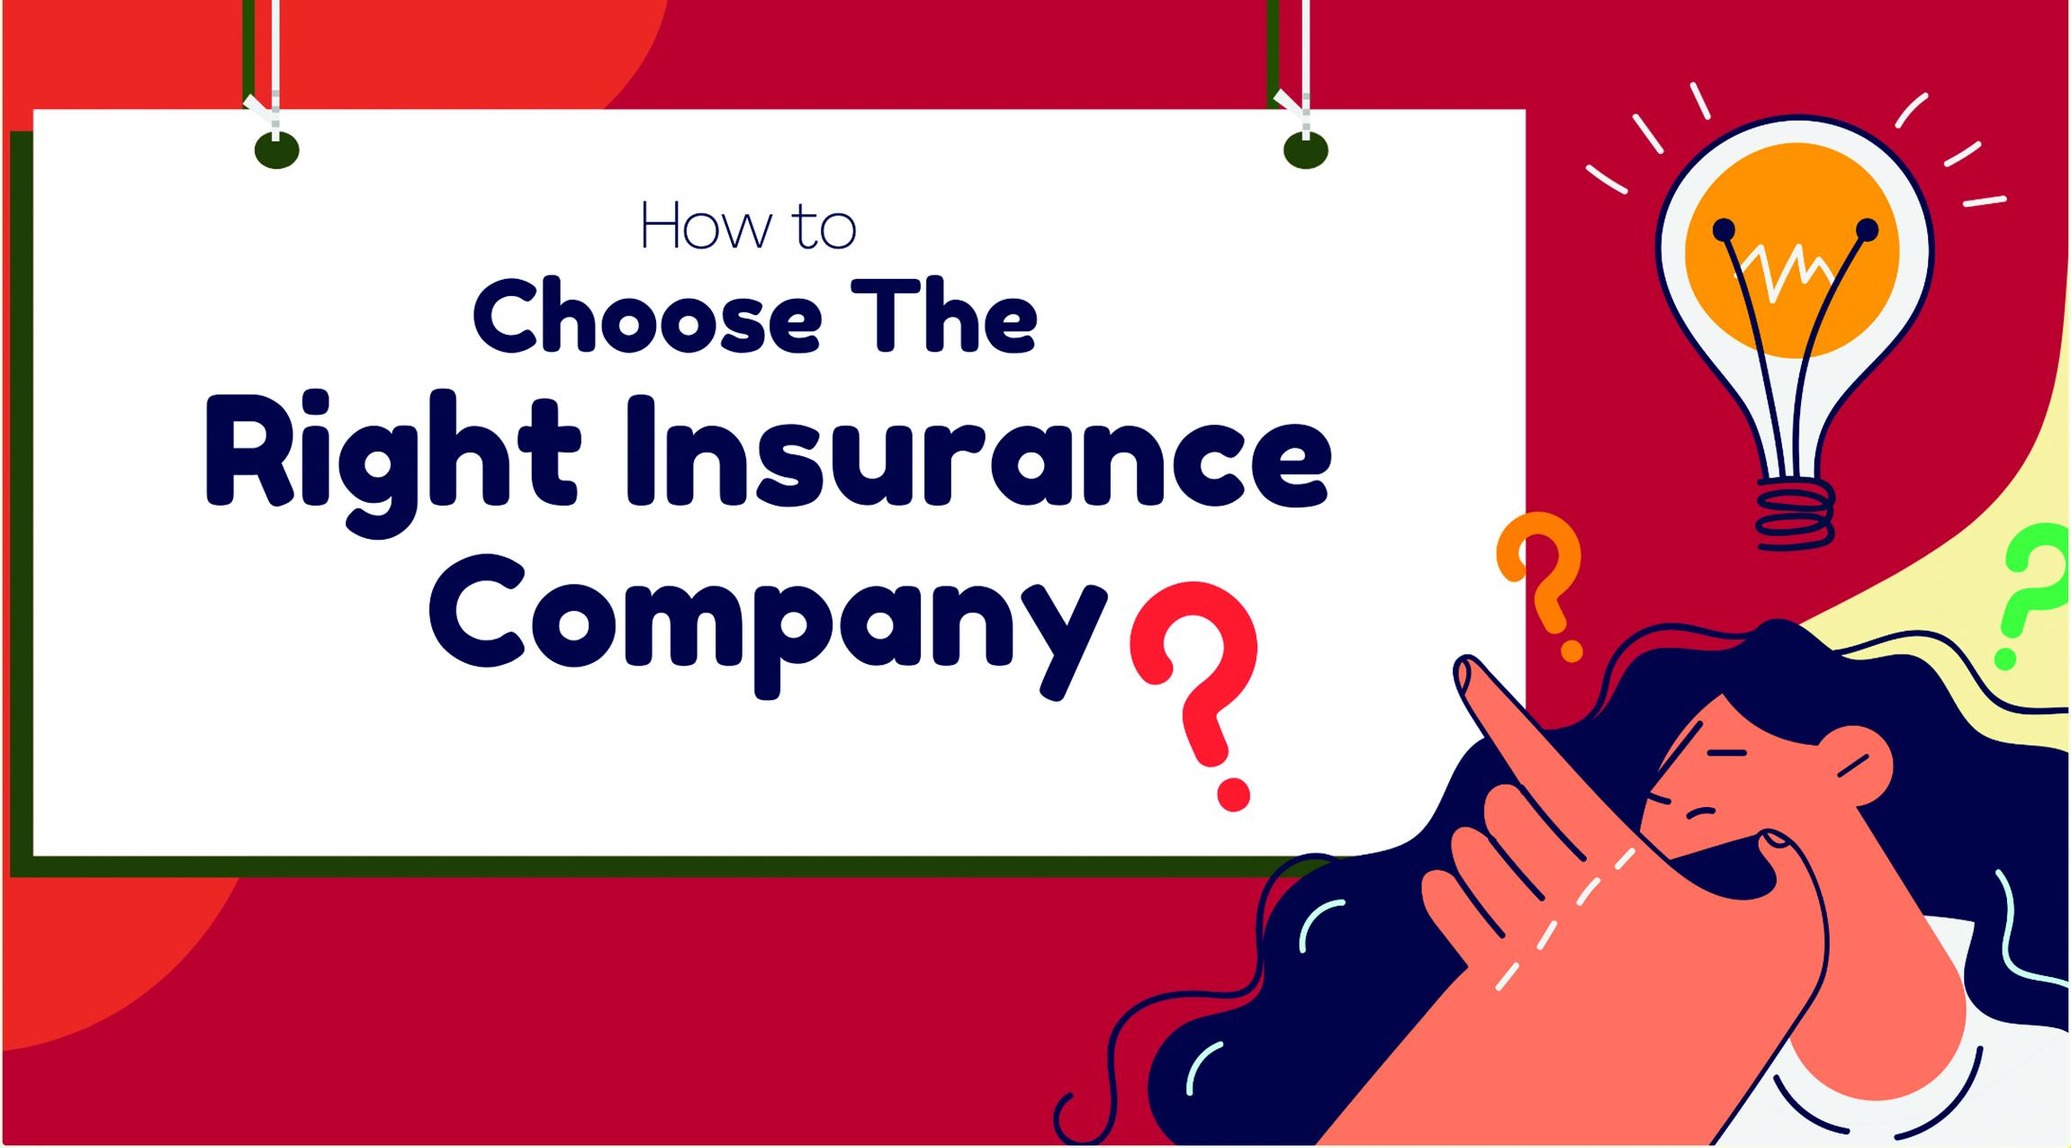 How To Choose The Right Insurance Company?